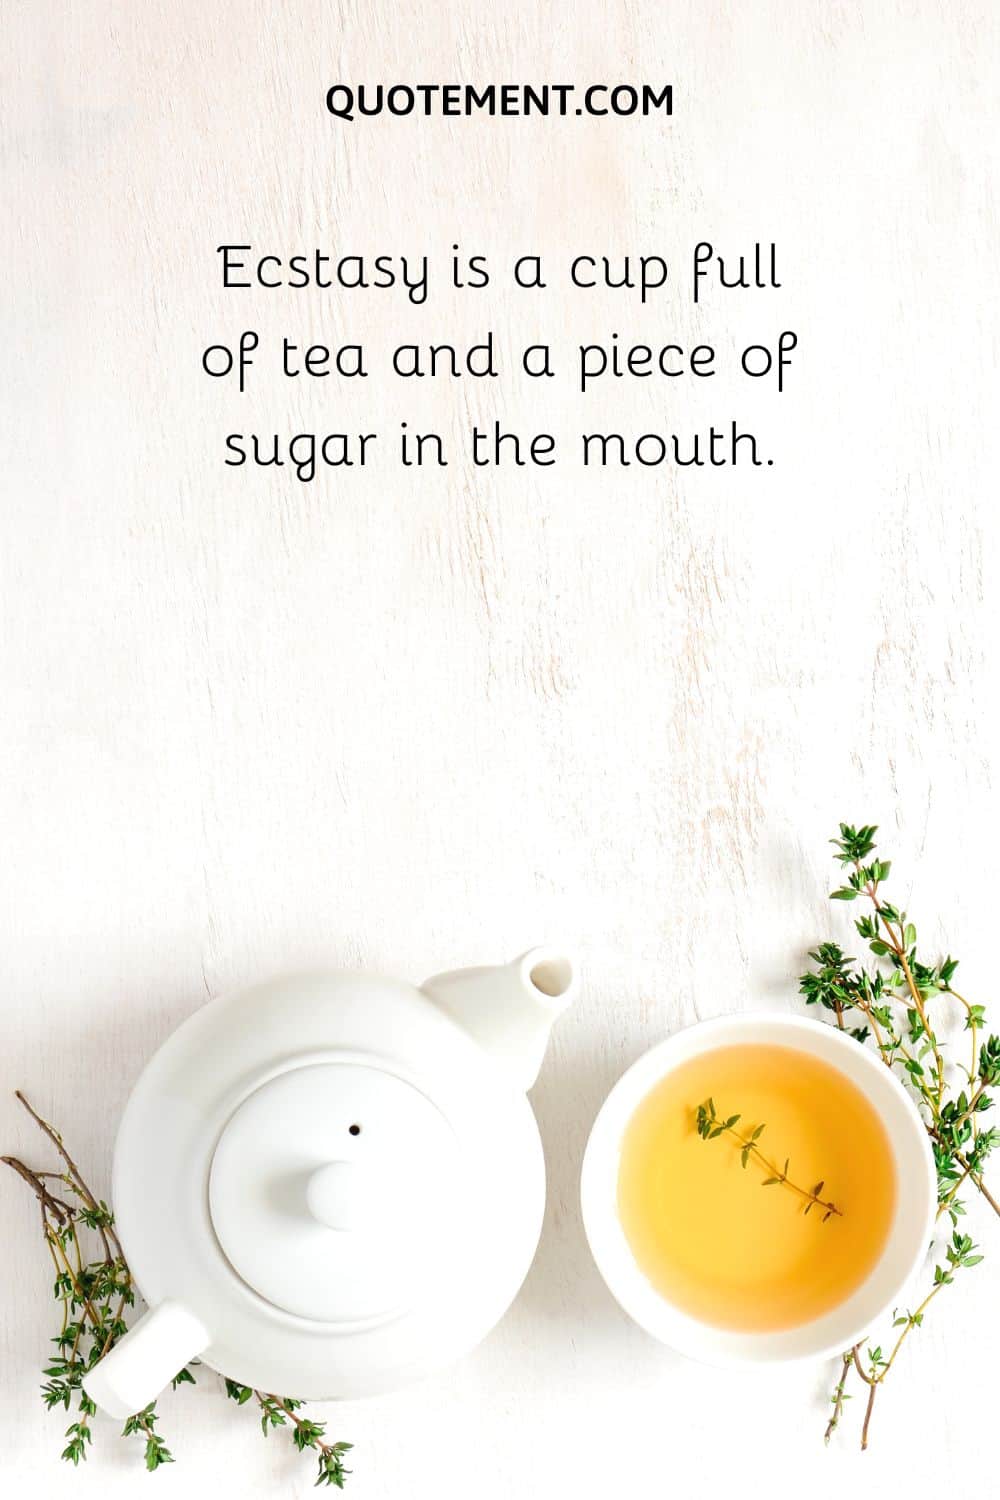 Ecstasy is a cup full of tea and a piece of sugar in the mouth.